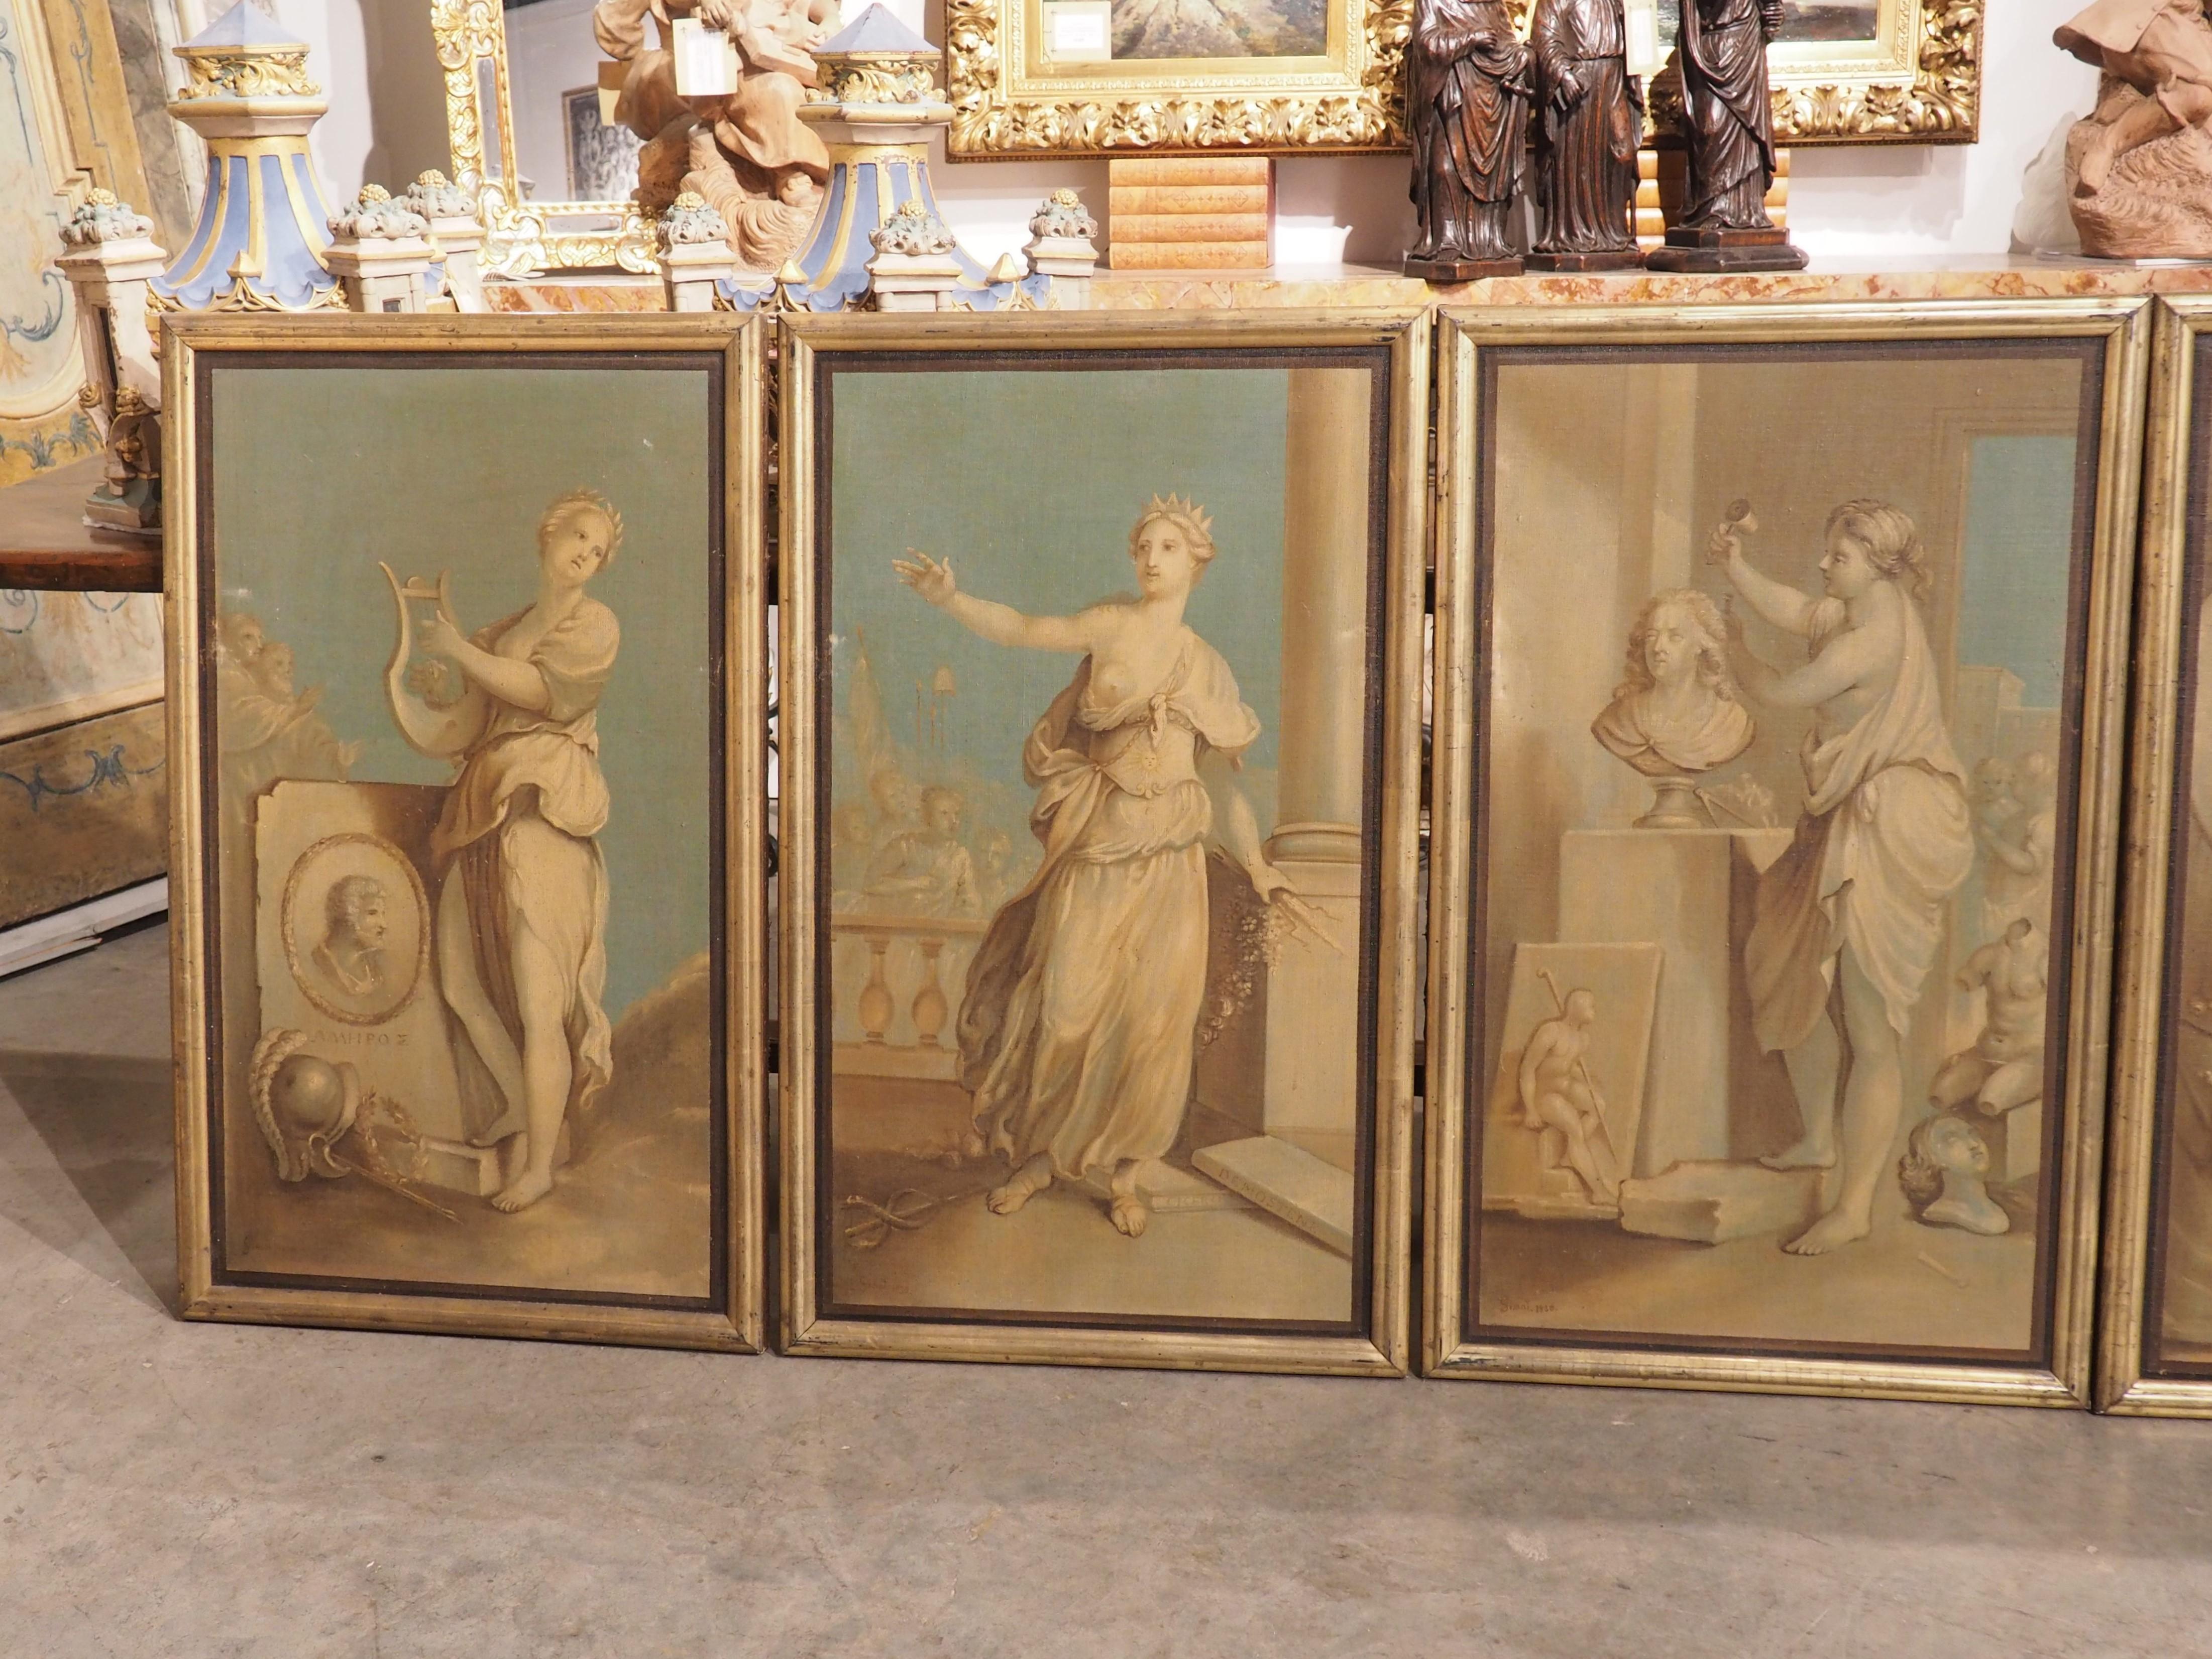 Painted in the Neoclassical style, this remarkable set of six oil on canvas paintings offers a captivating allegorical portrayal of the Muses from Greek mythology, each signed and dated “Simat 1830”.  Each painting measures 41 inches tall by 24 3/4